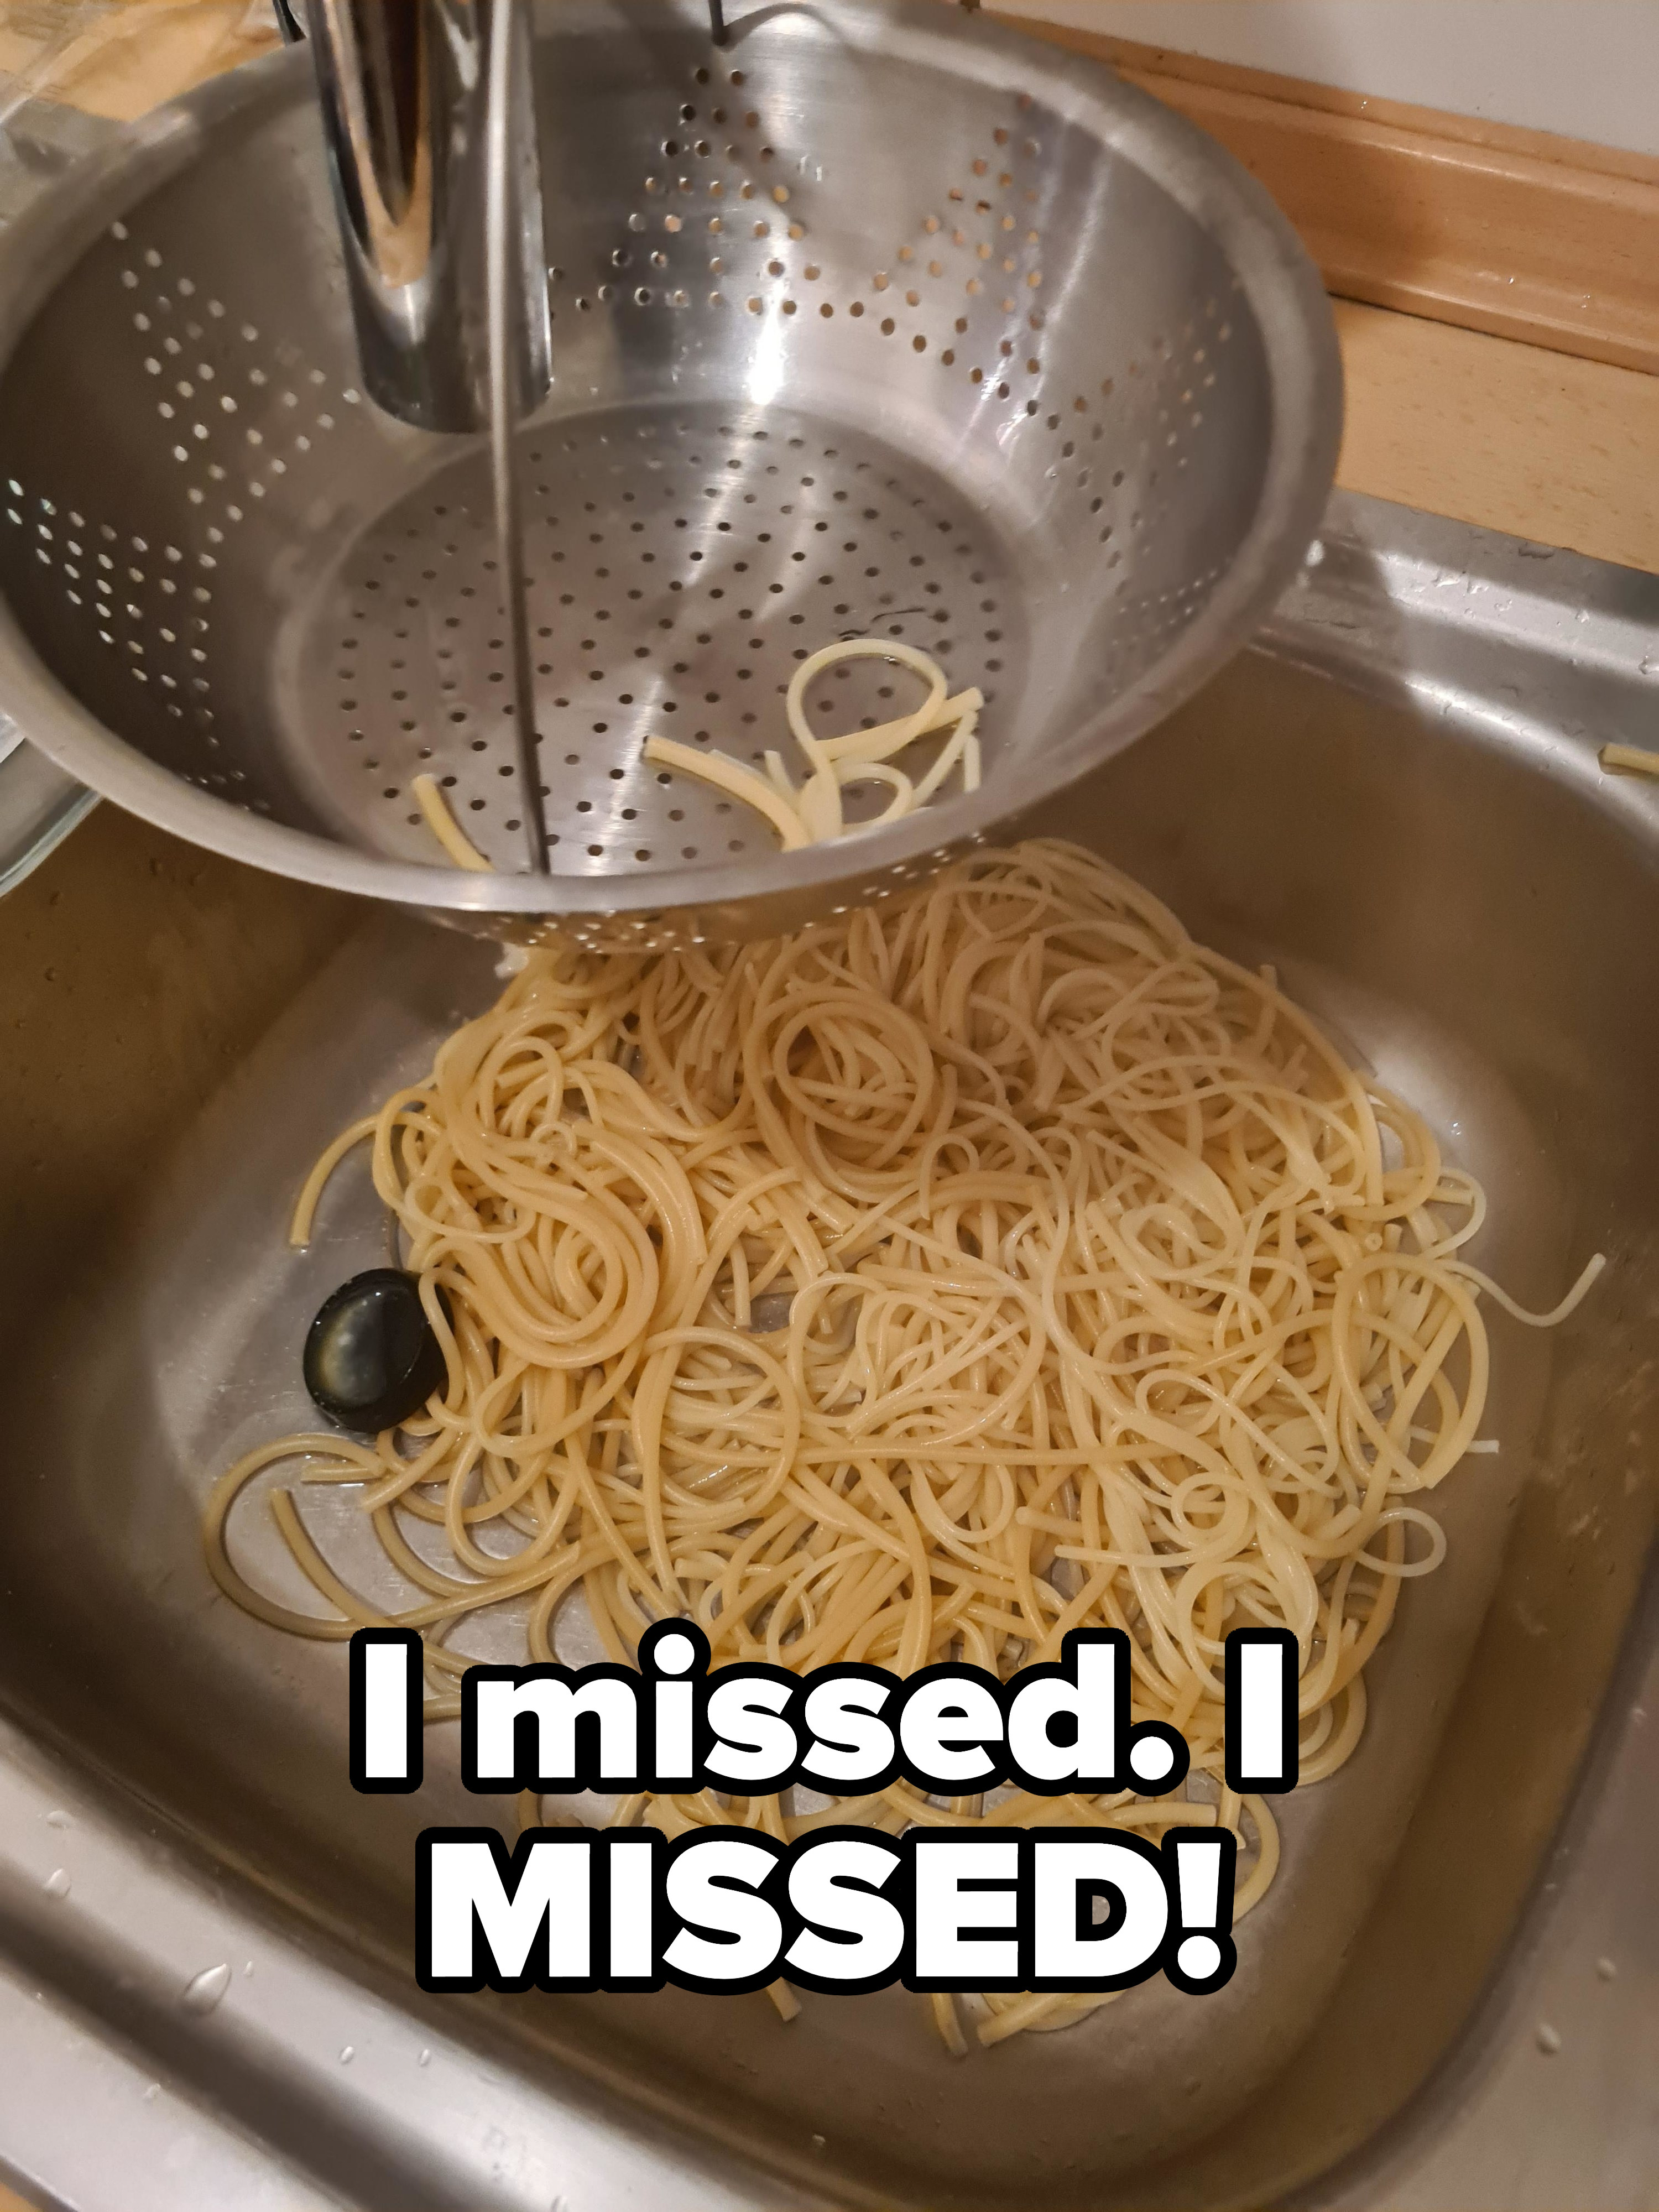 person who missed the collandar with spaghetti